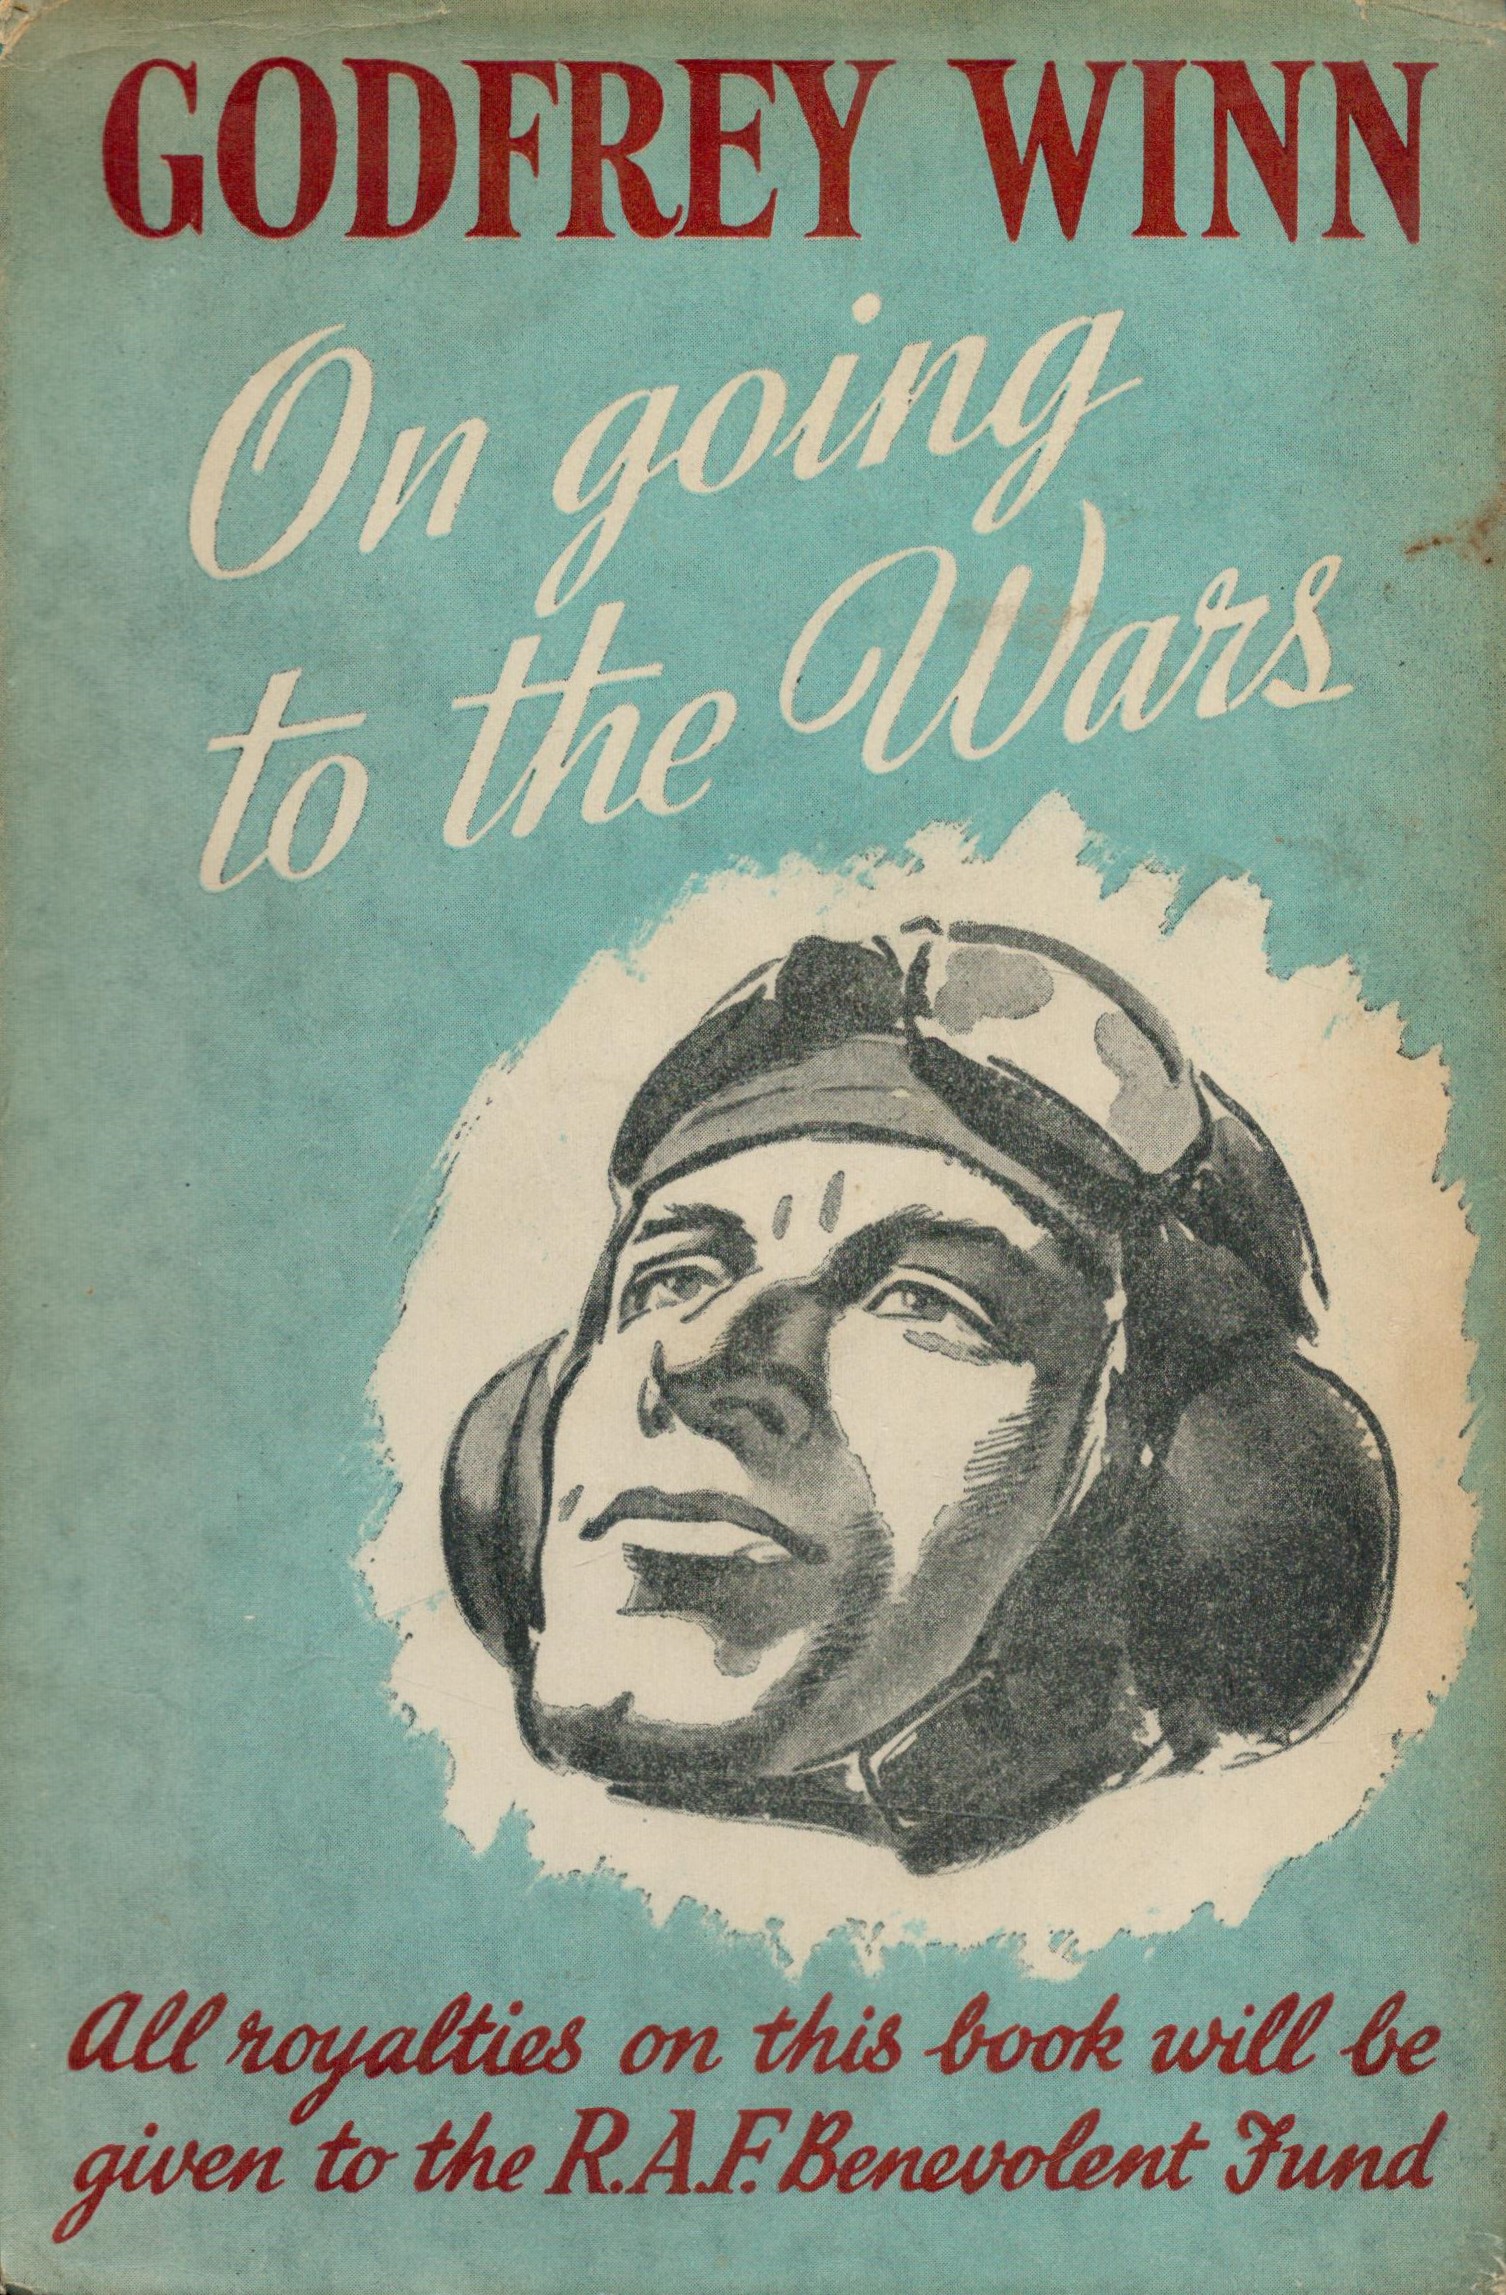 Godfrey Winn. On Going To The Wars. WW2 hardback book. Showing signs of age. Dedicated. Signed by